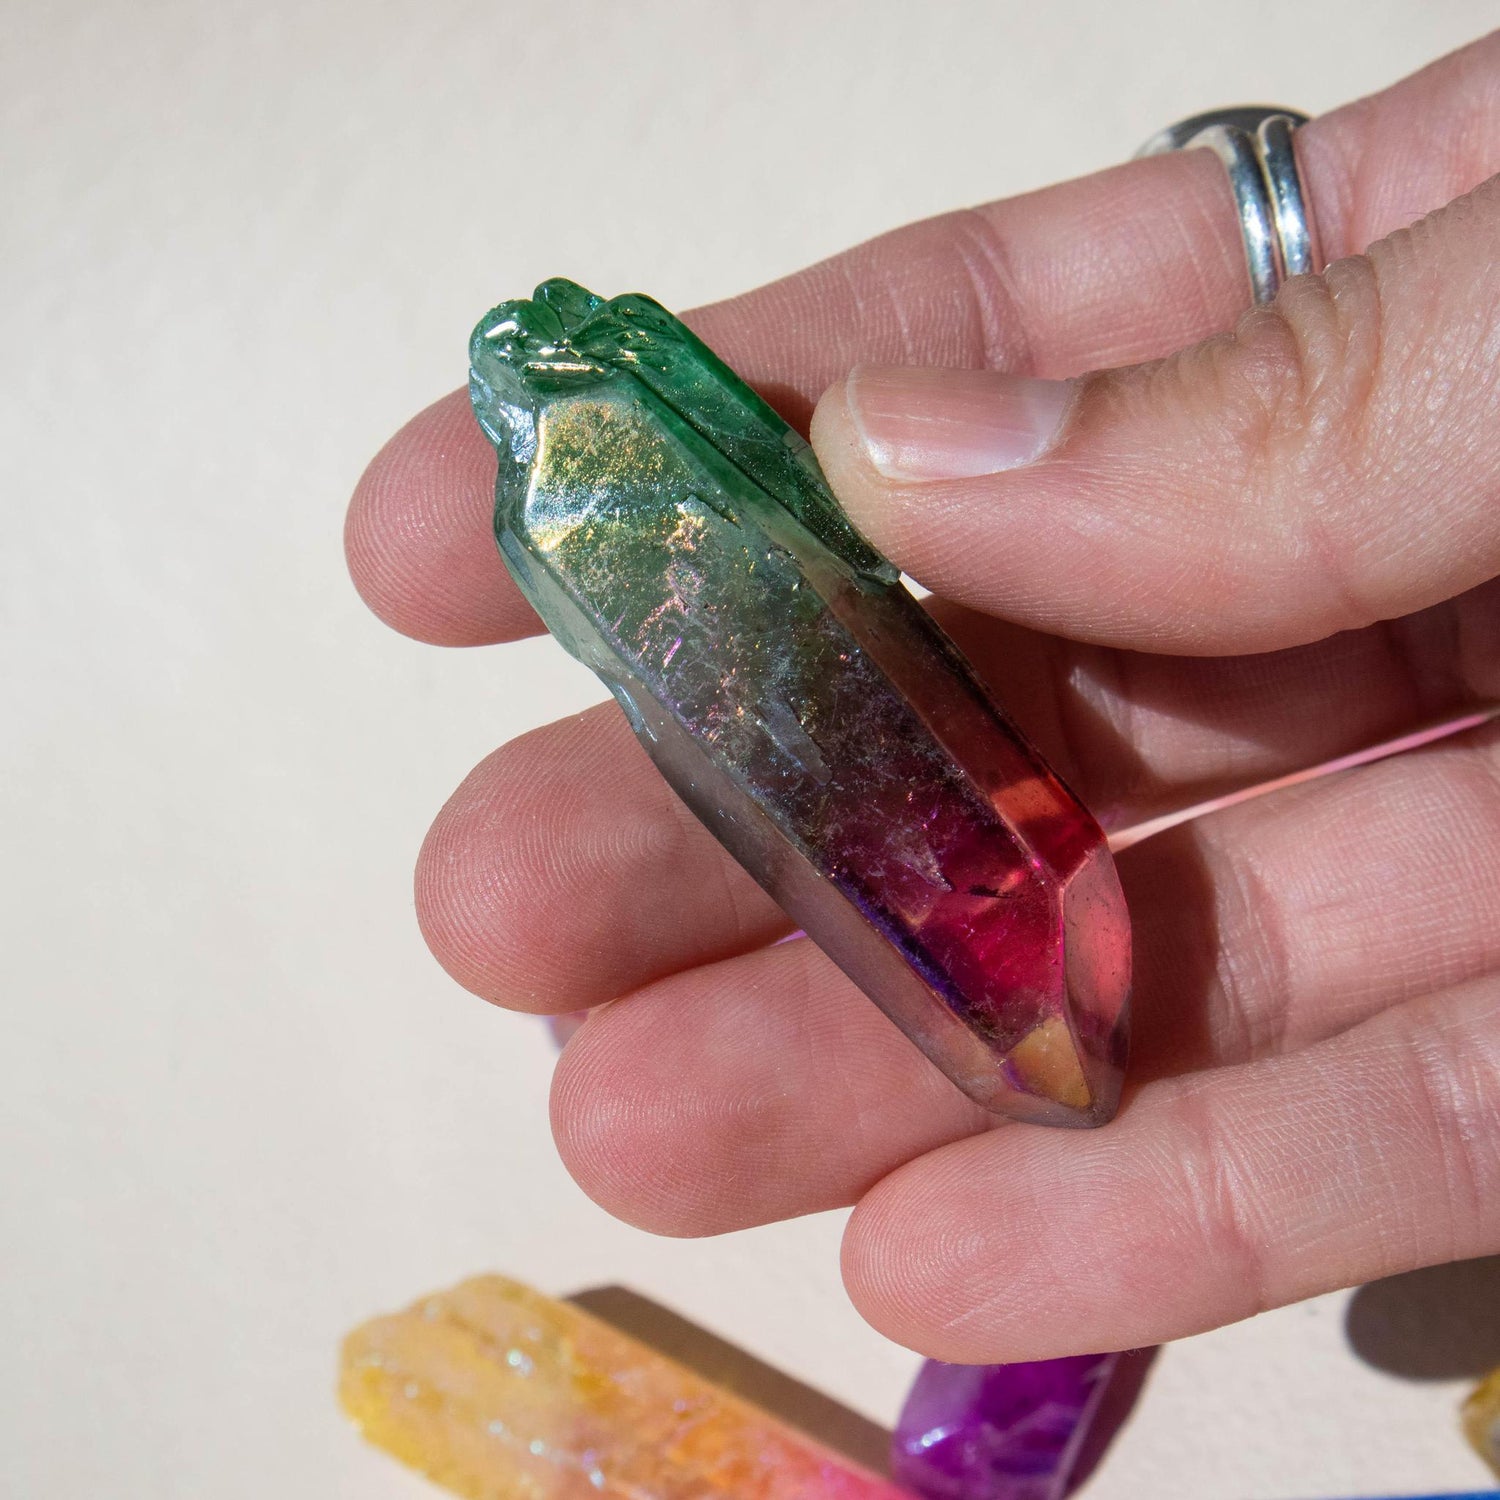 watermelon aura, watermelon aura quartz, aura quartz point, aura quartz, crystal point, watermelon aura crystal, watermelon aura stone, watermelon aura properties, watermelon aura healing properties, watermelon aura metaphysical properties, watermelon aura meaning